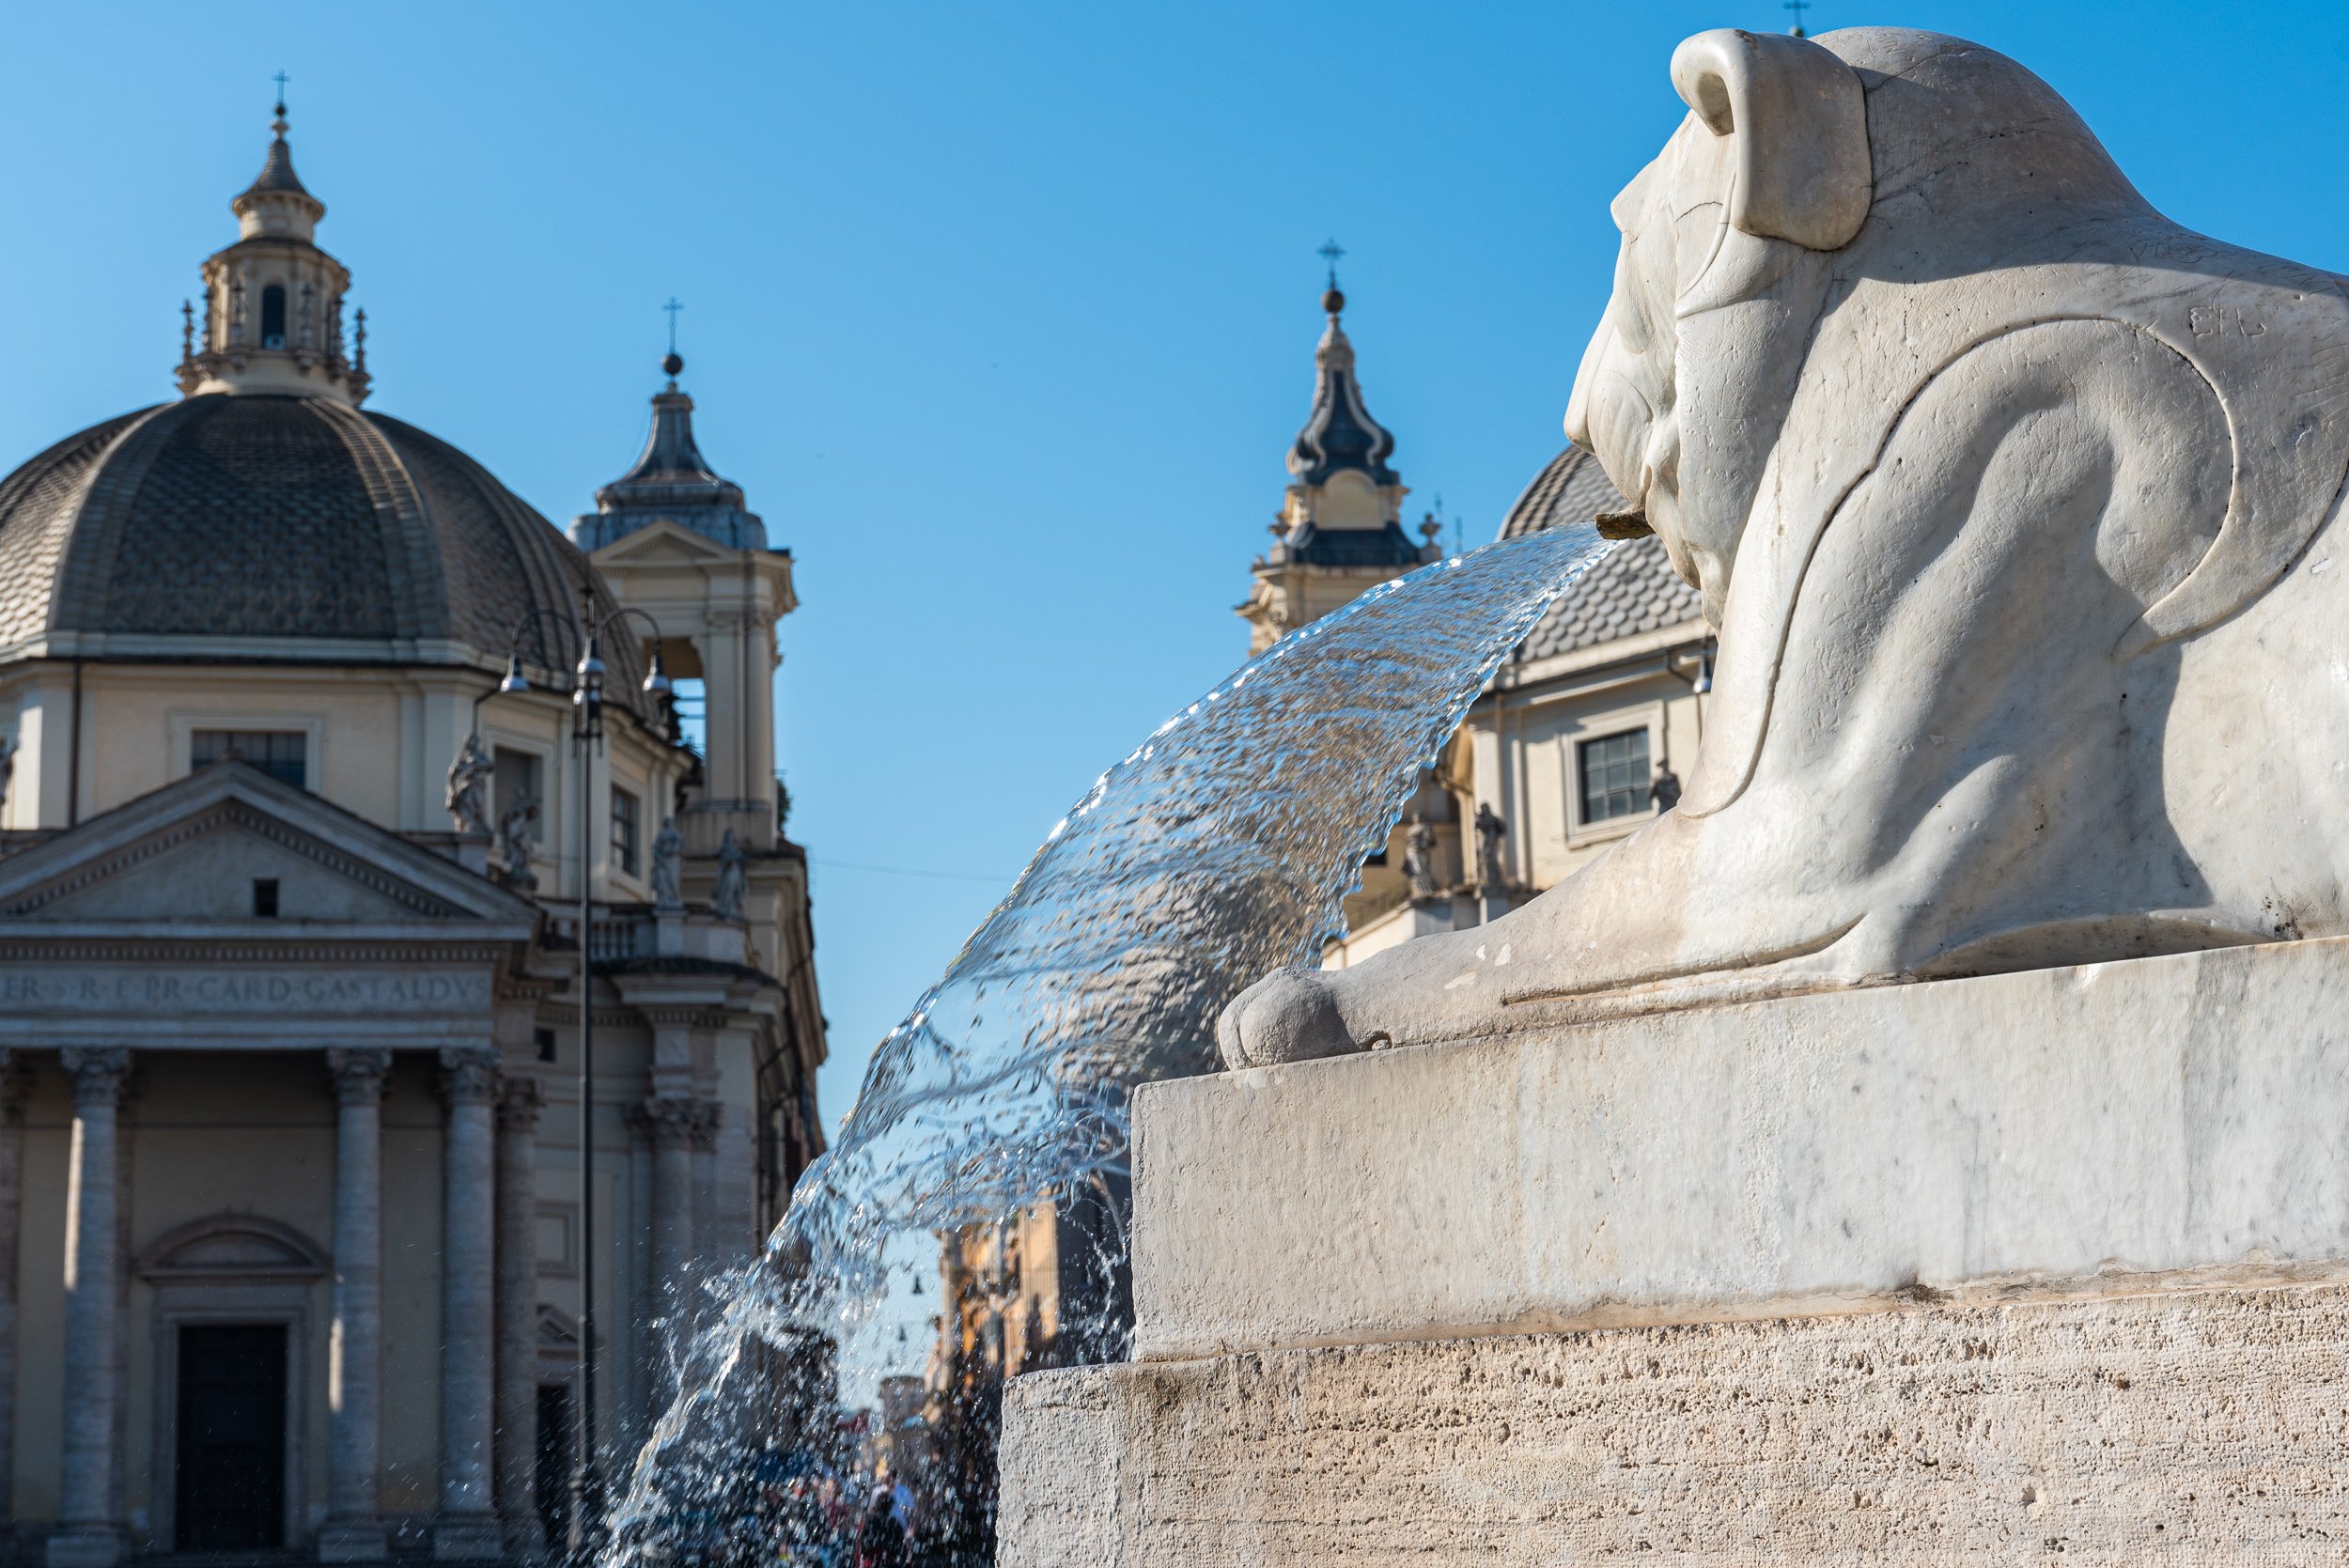 Drinking Fountains In Rome - Lion's Mouth